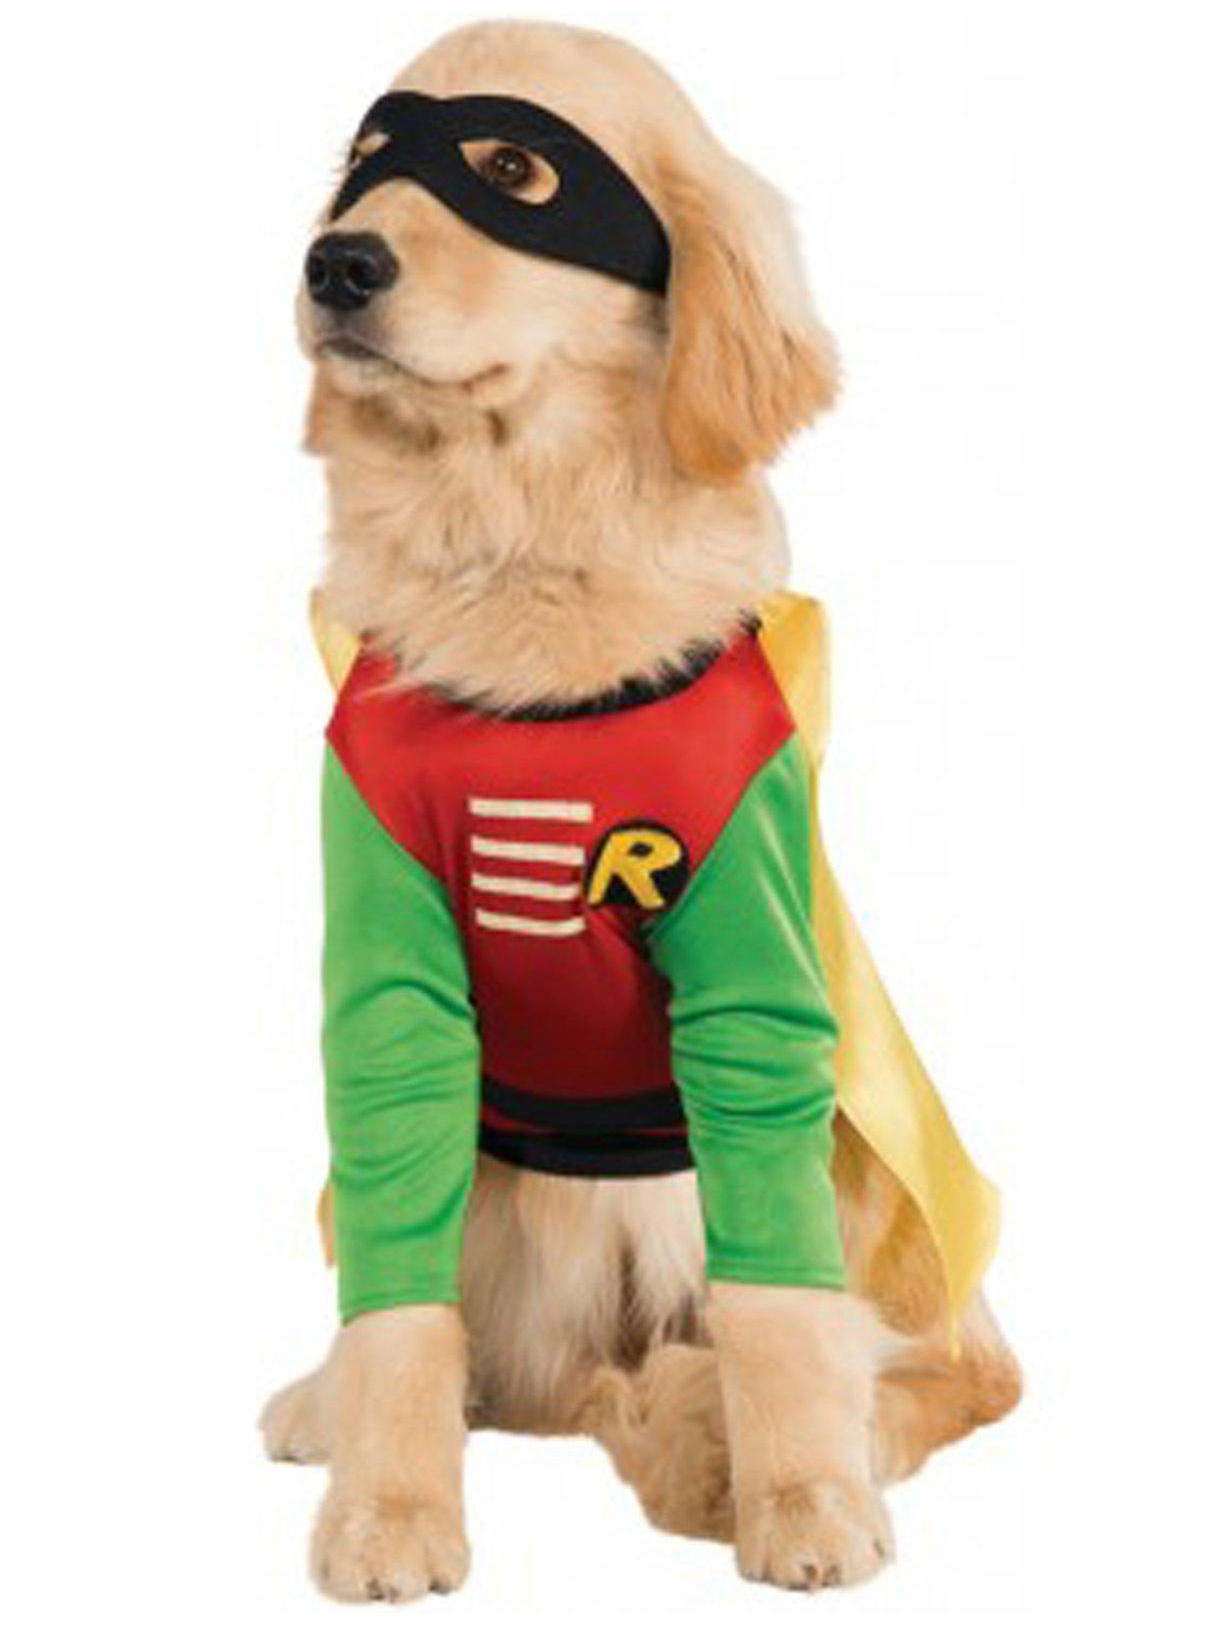 Pet Costume Robin Small - image 1 of 6